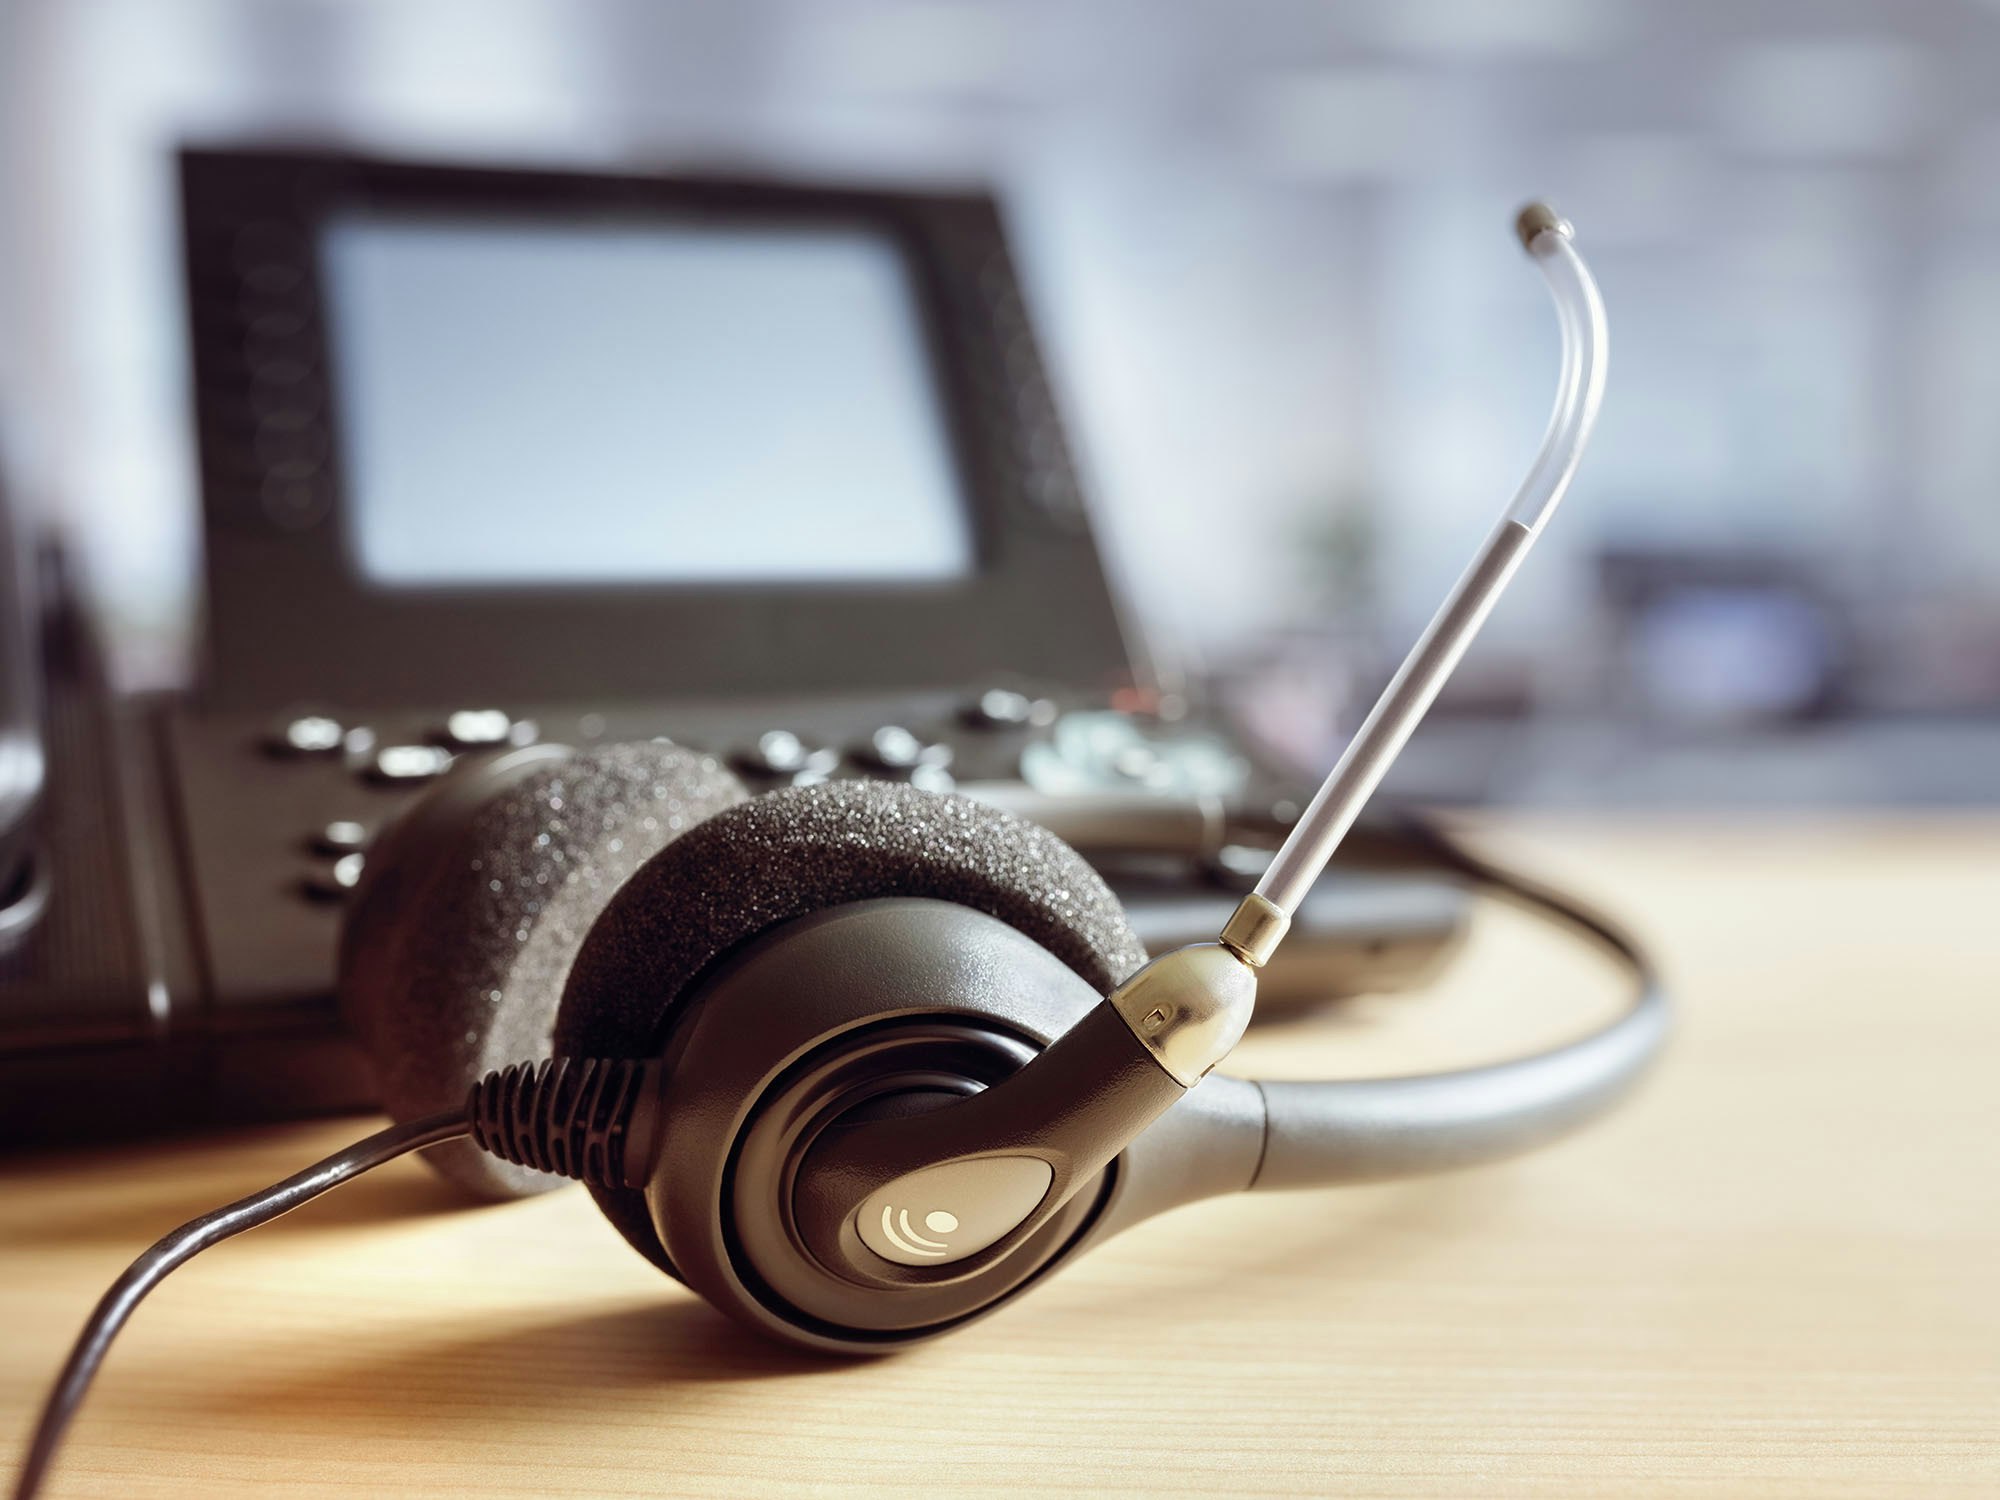 Serco Citizens Services Pty Ltd (Serco) will operate the NDIA call centre out of Melbourne and regional Victoria over the next two years, commencing next month. [Source: Shutterstock]
